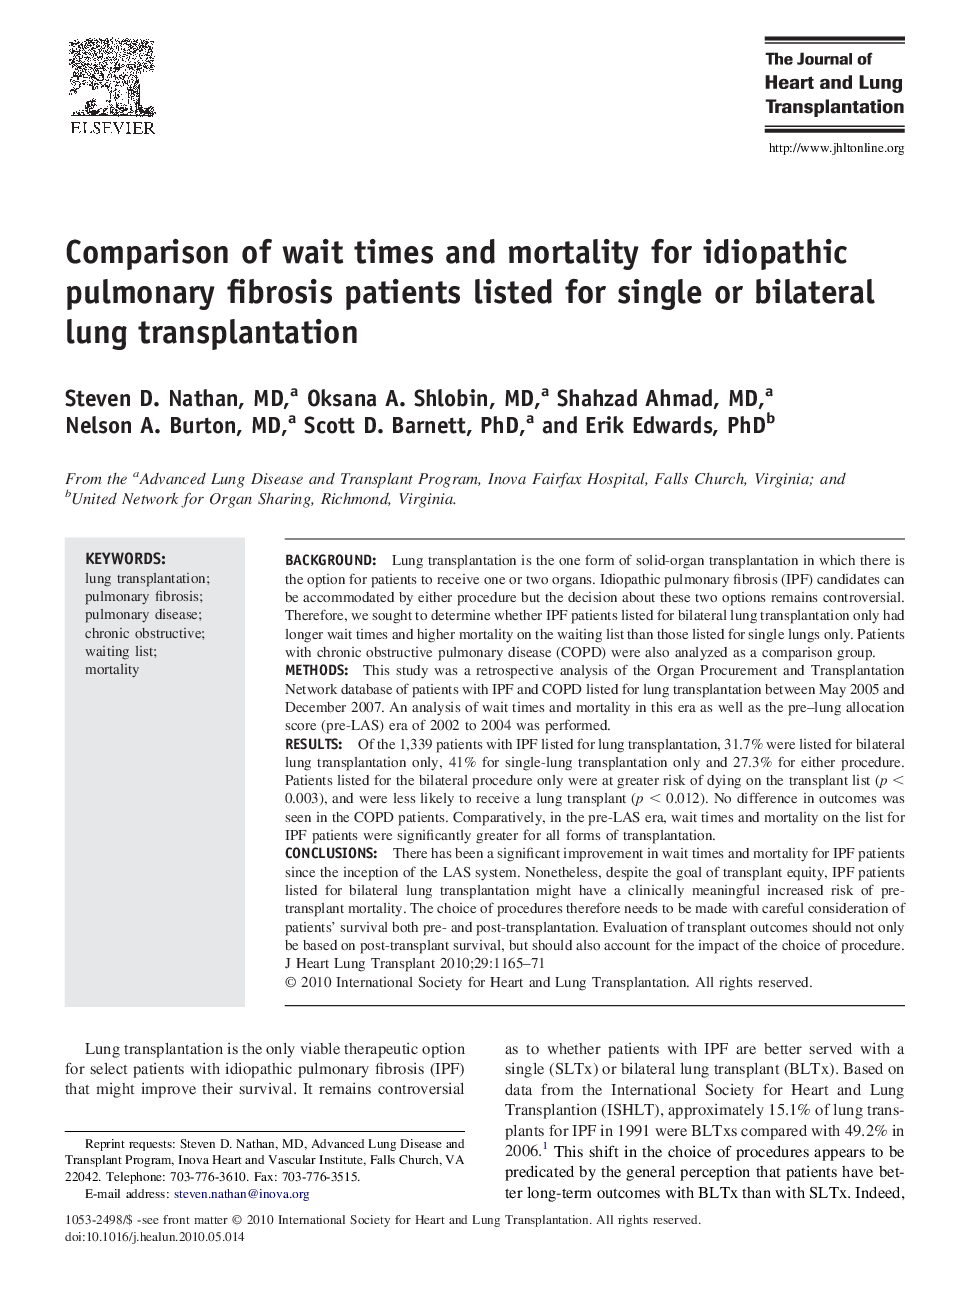 Comparison of wait times and mortality for idiopathic pulmonary fibrosis patients listed for single or bilateral lung transplantation